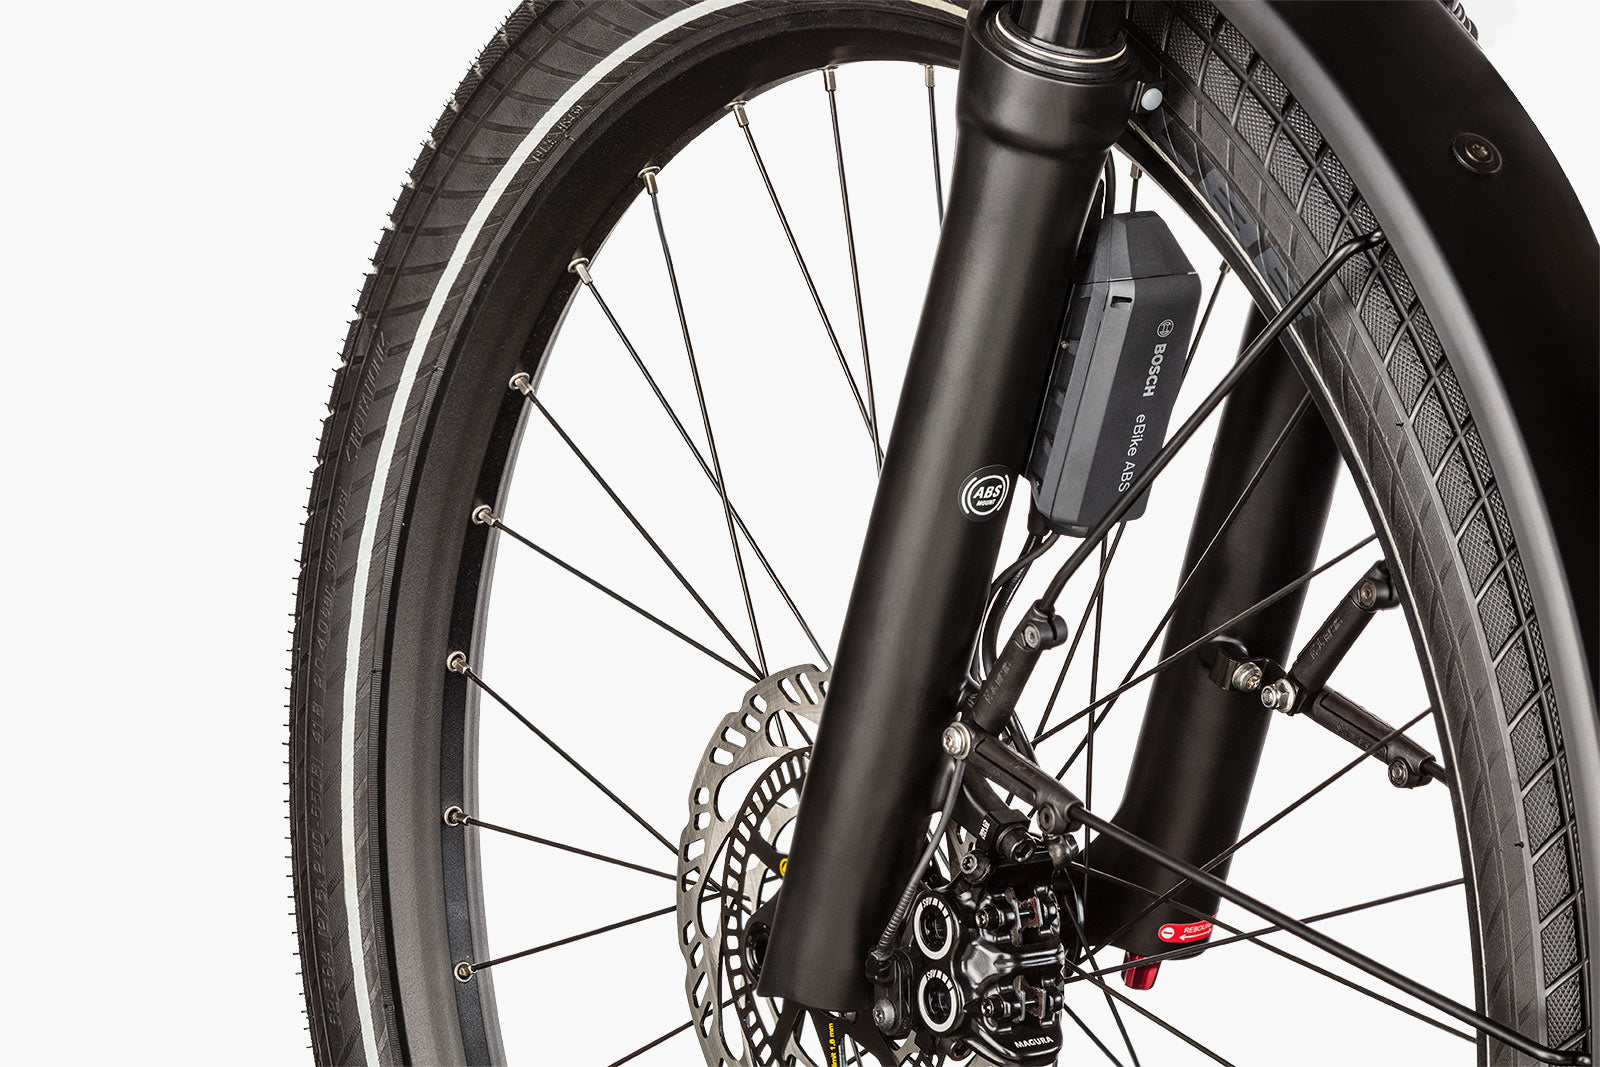 Bosch eBike ABS 2.0 for Riese & Muller Homage4